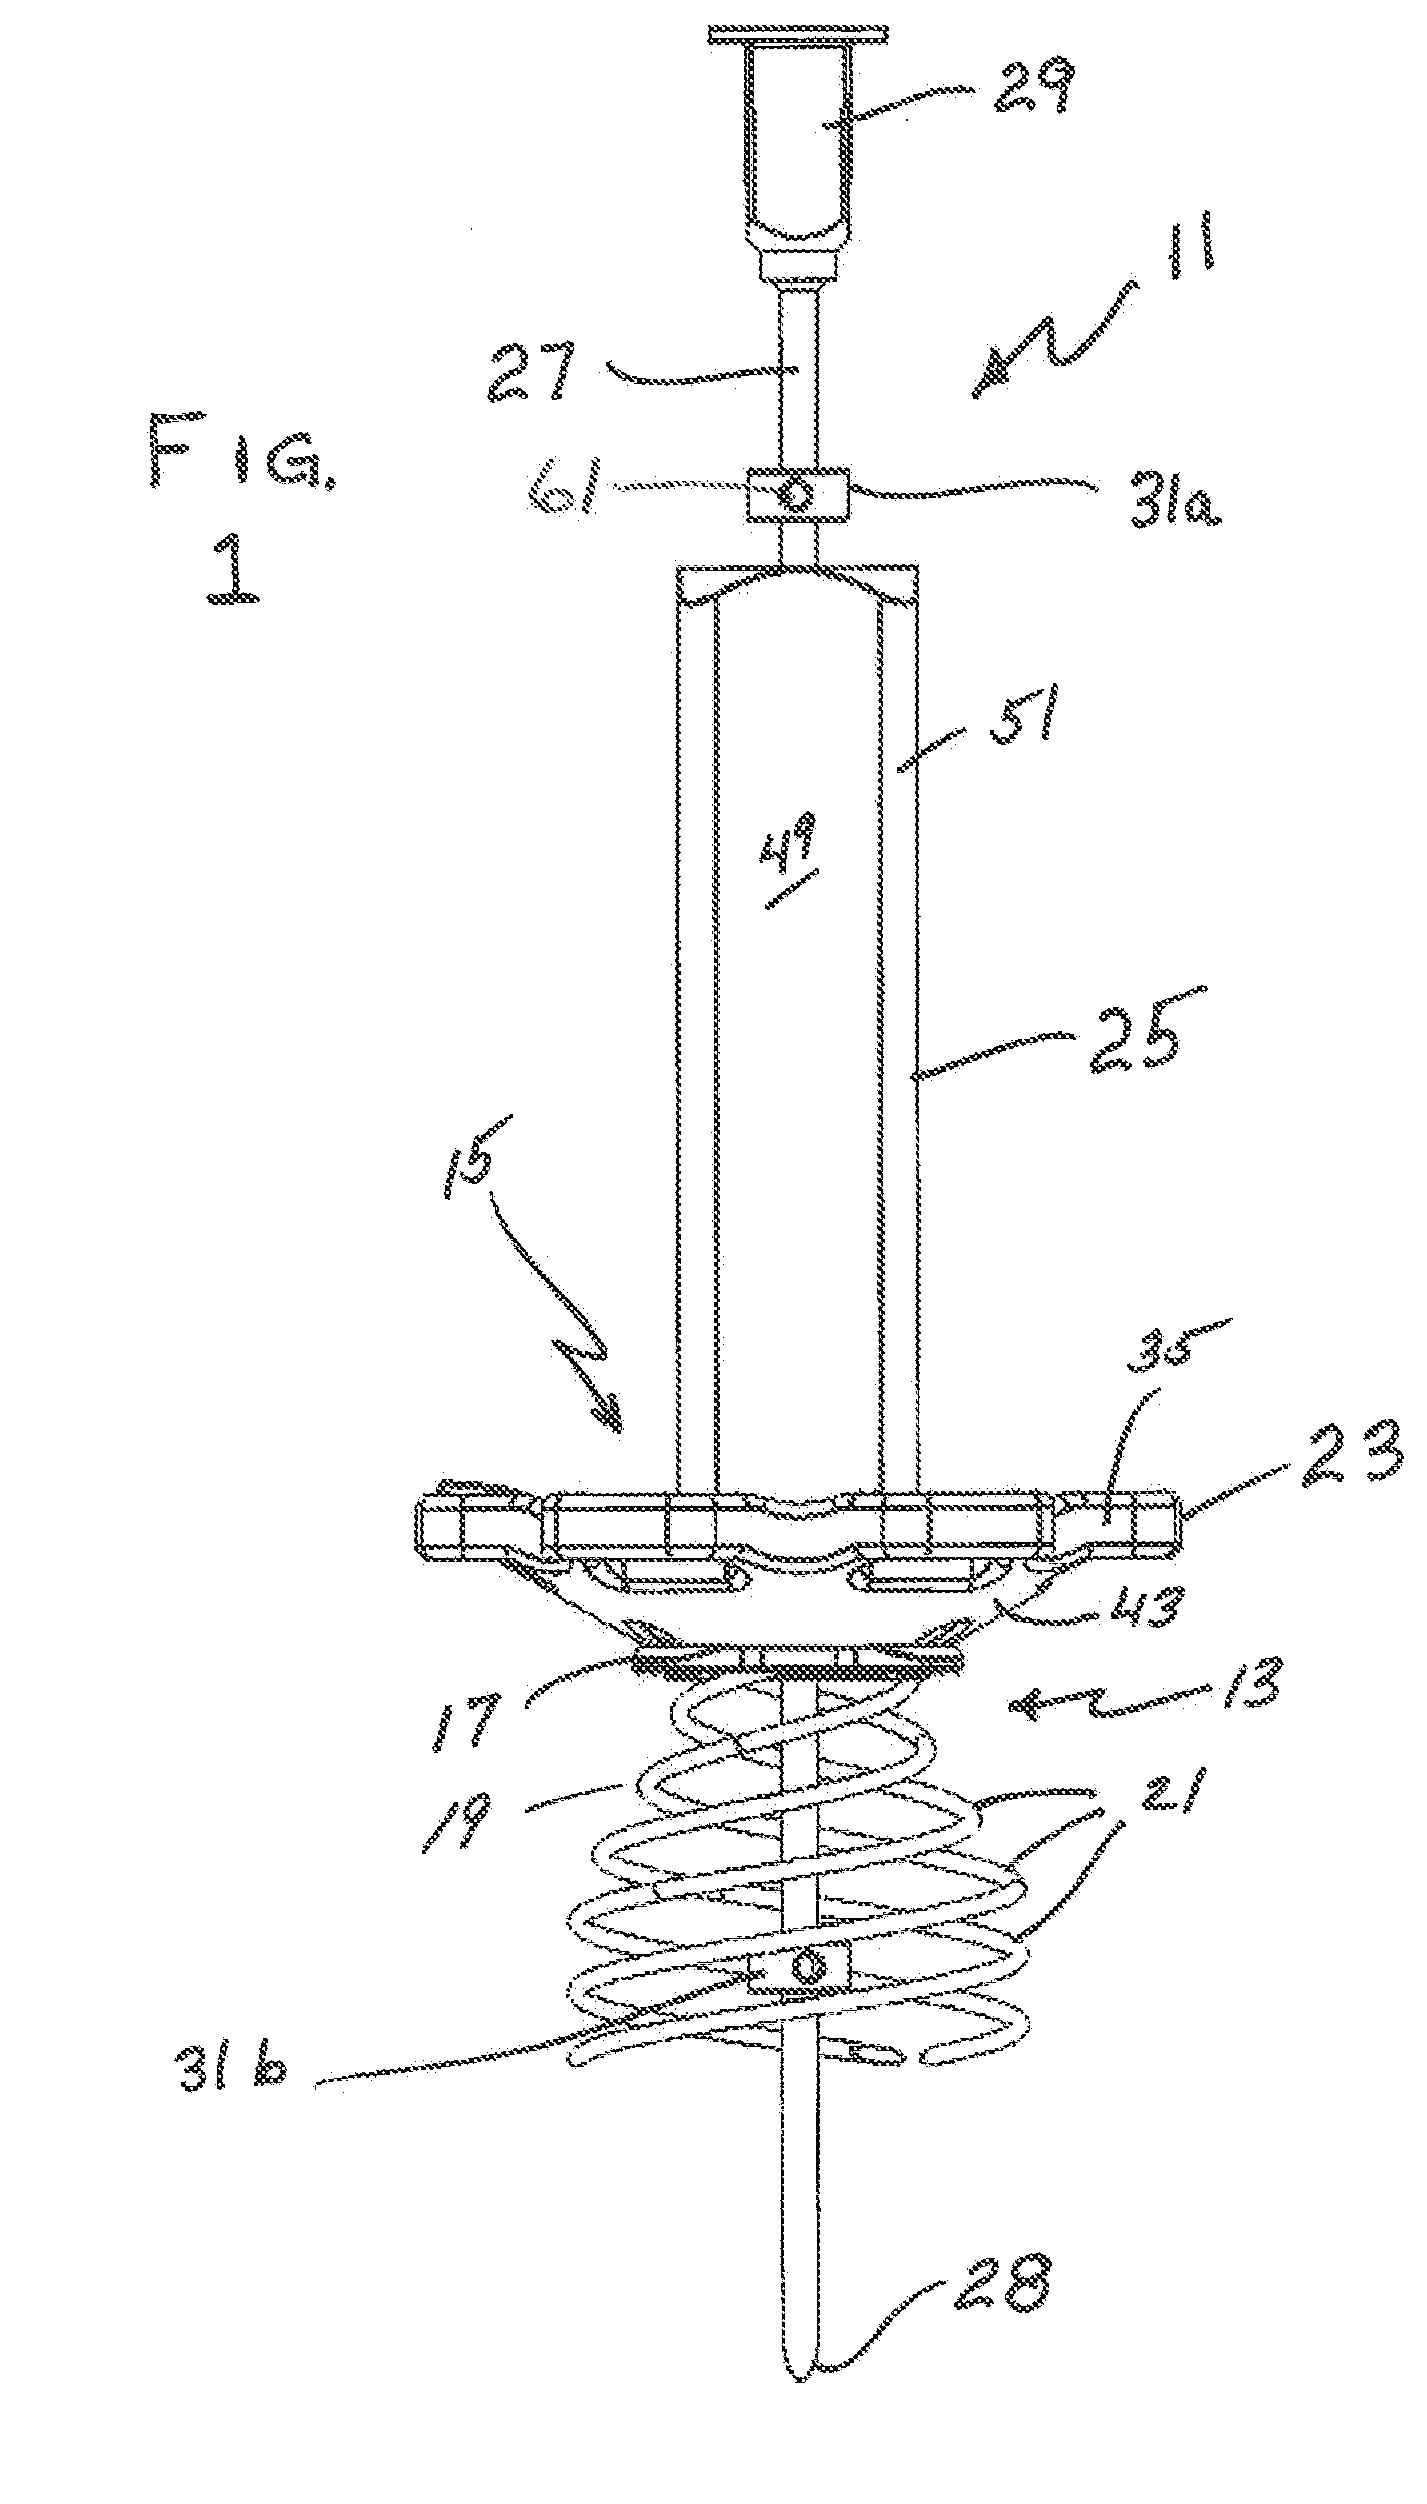 Device for creating temporary access and then closure